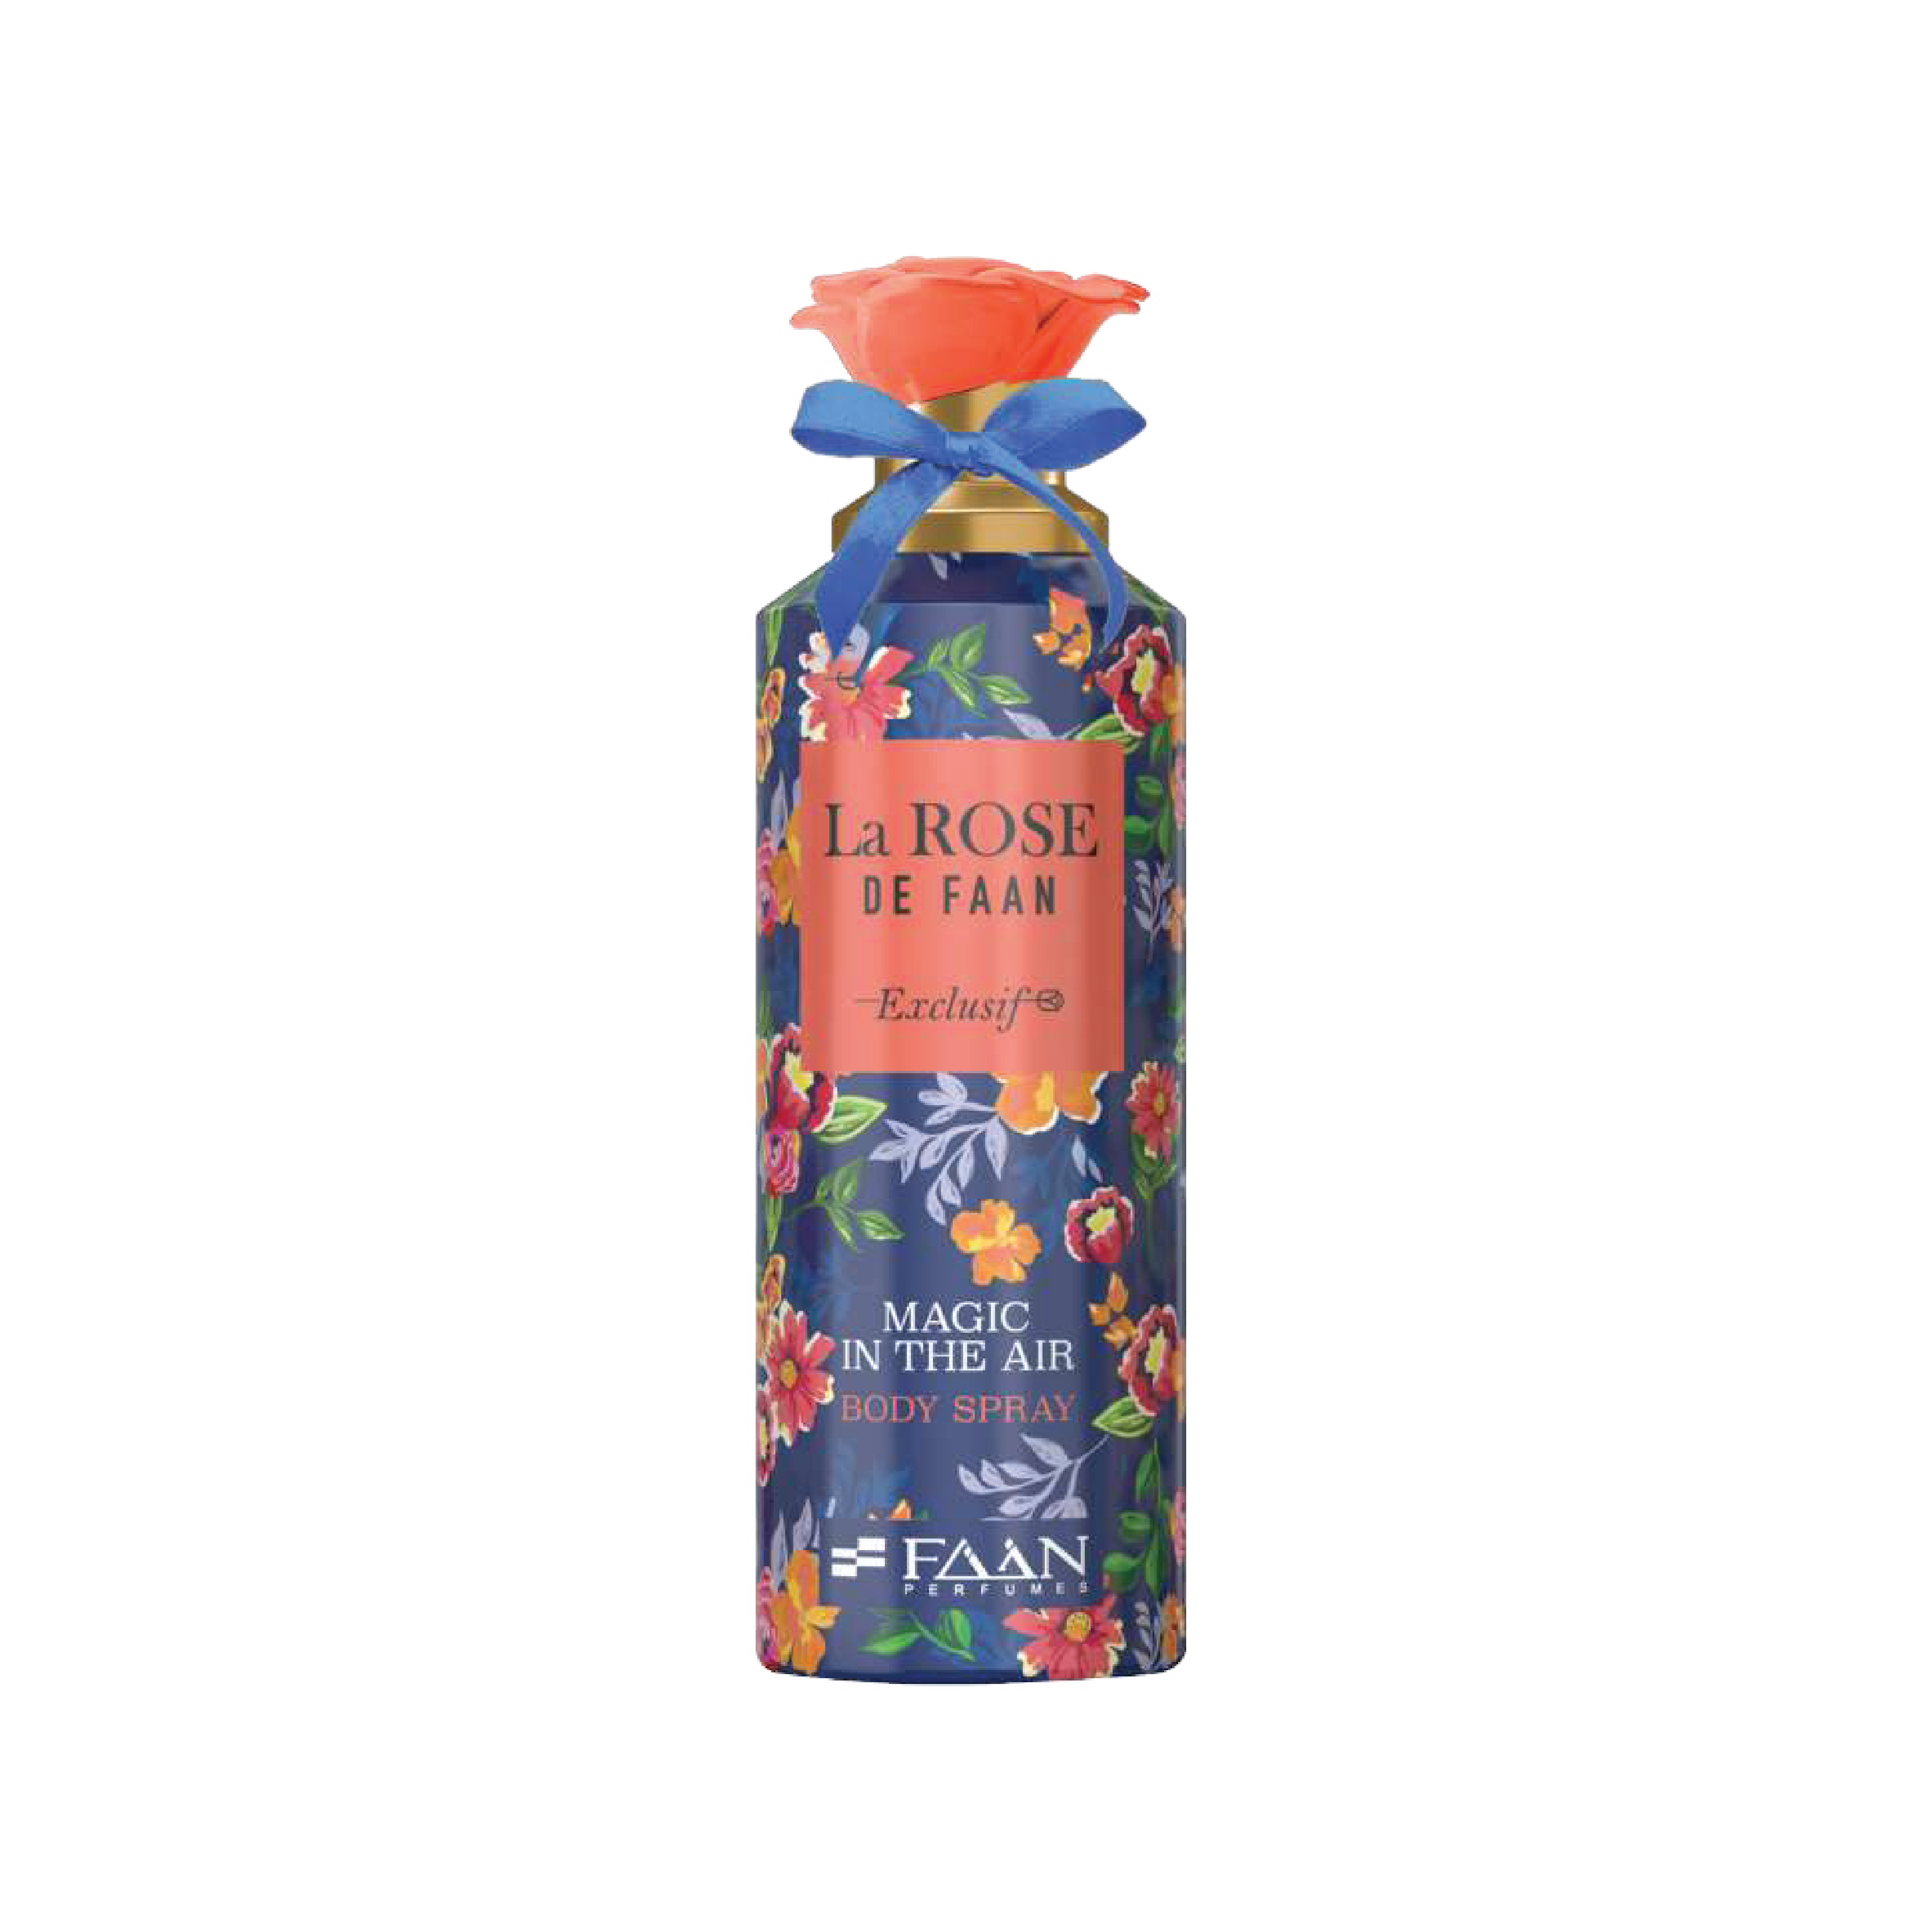 Embark on a Magical Journey with LA ROSE's New Body Spray Magic in the Air